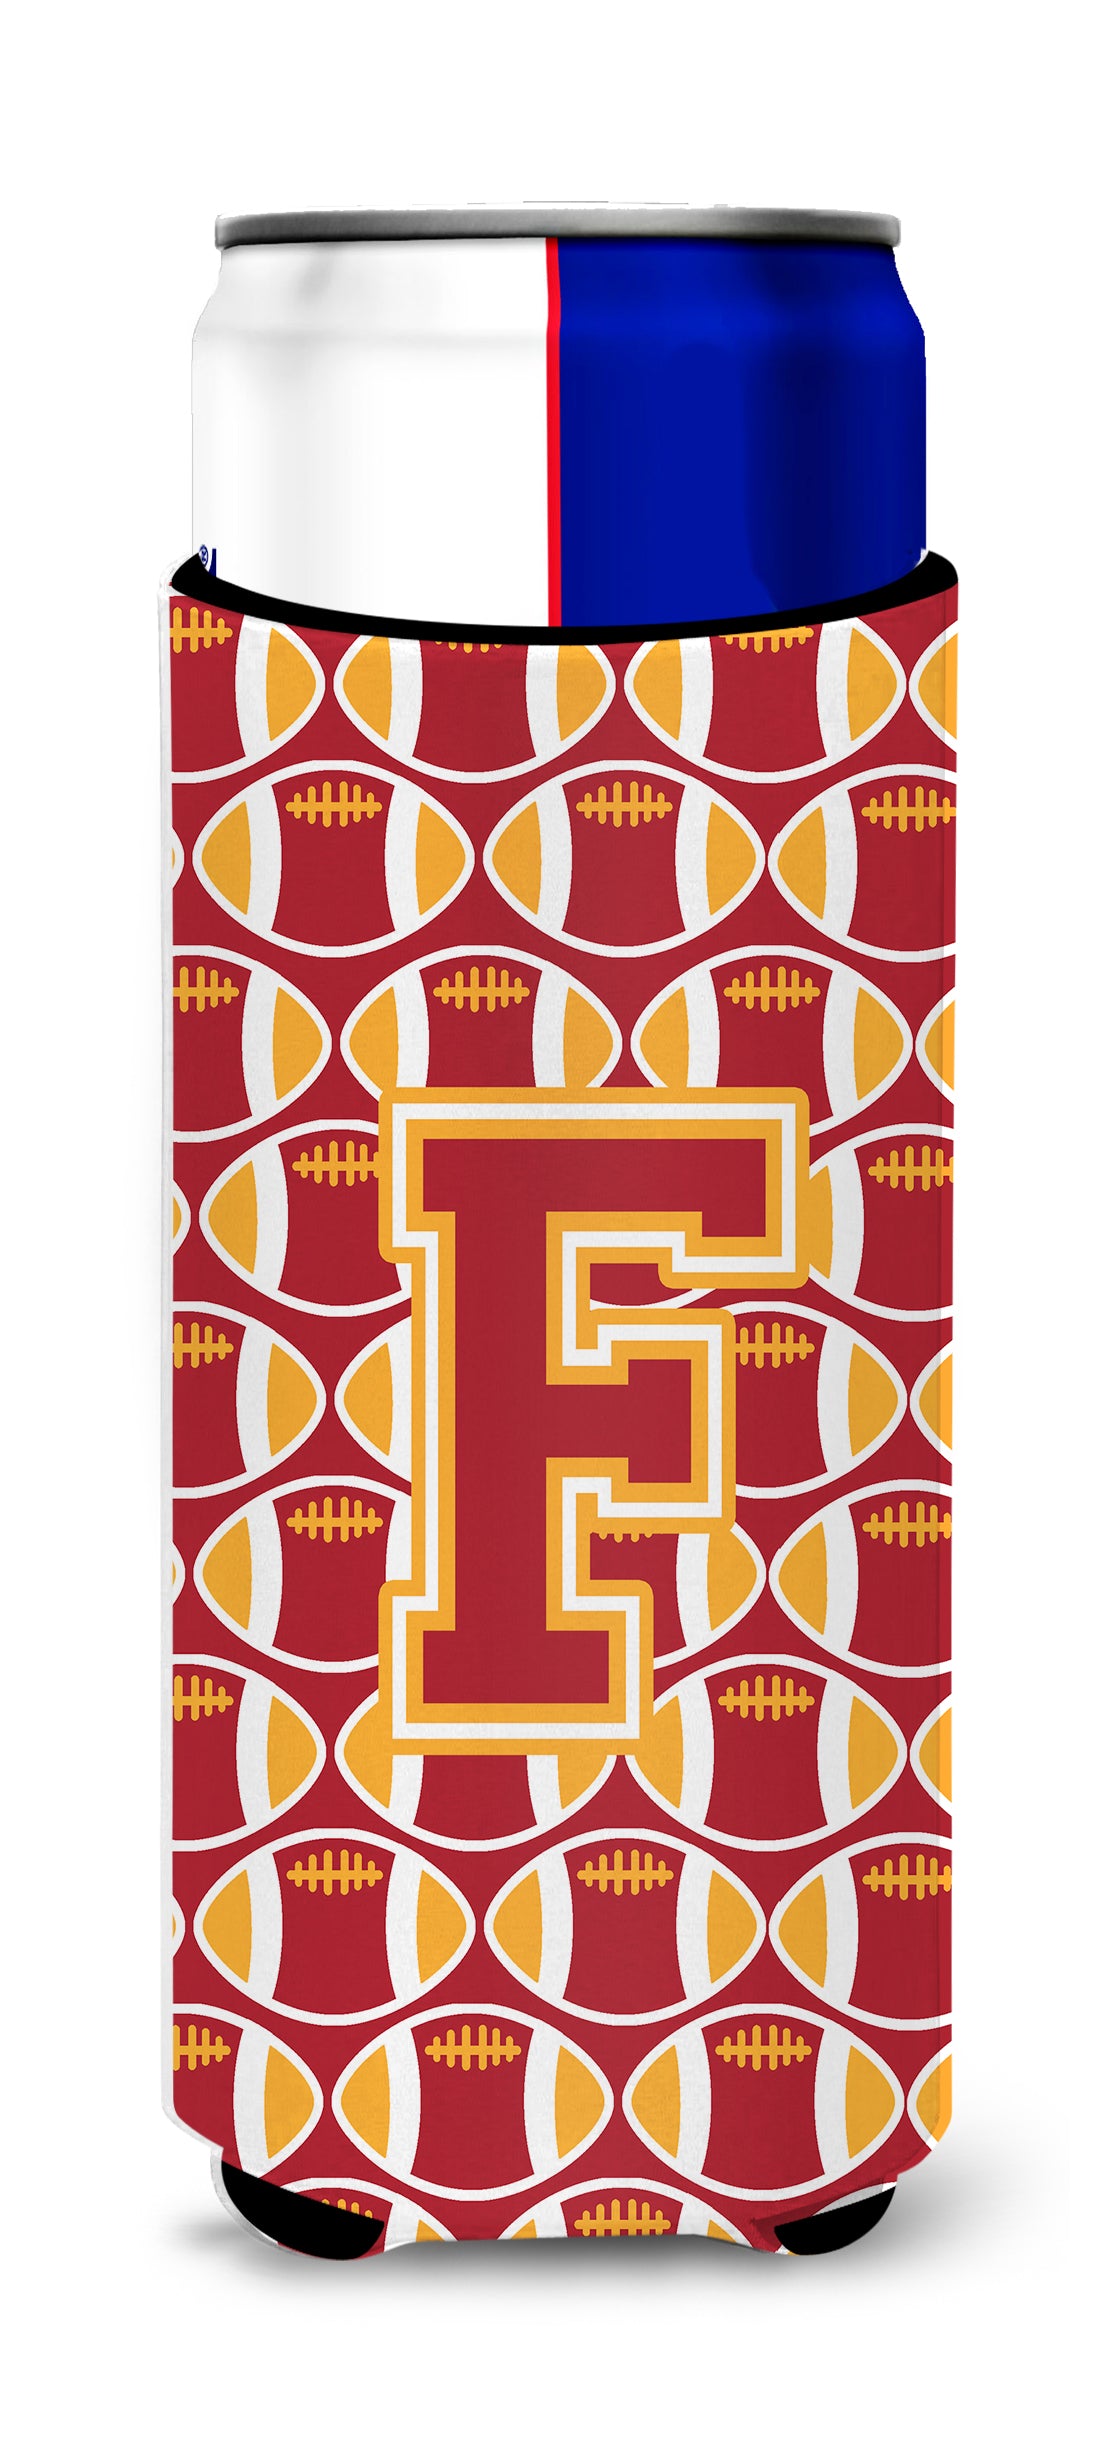 Letter F Football Cardinal and Gold Ultra Beverage Insulators for slim cans CJ1070-FMUK.